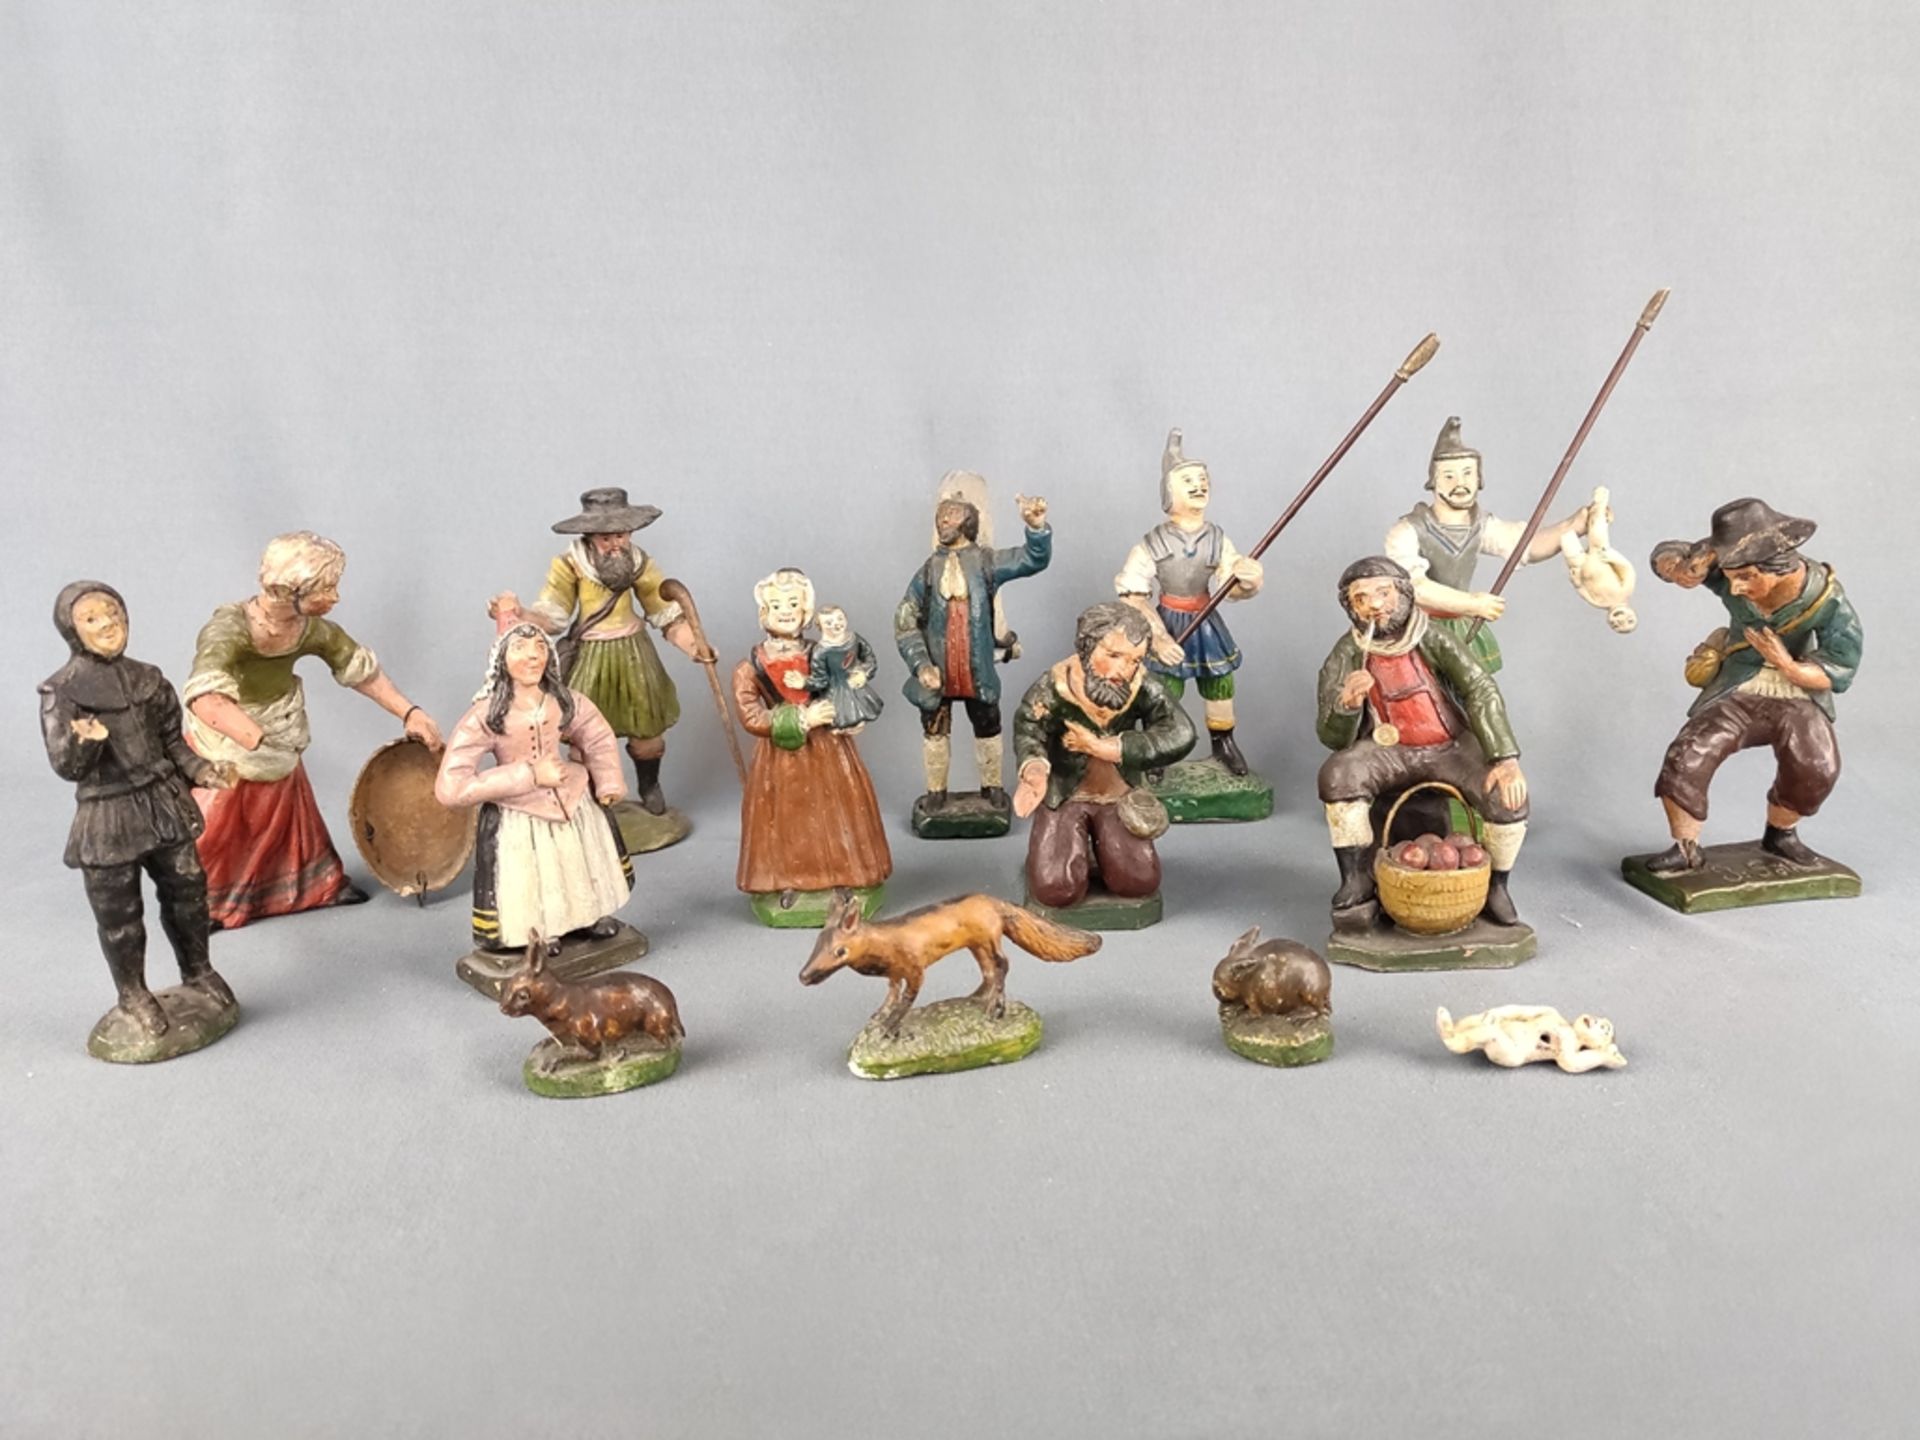 15 figurines, 19th century, terracotta, colourfully painted, one signed on base J: Göth., height of